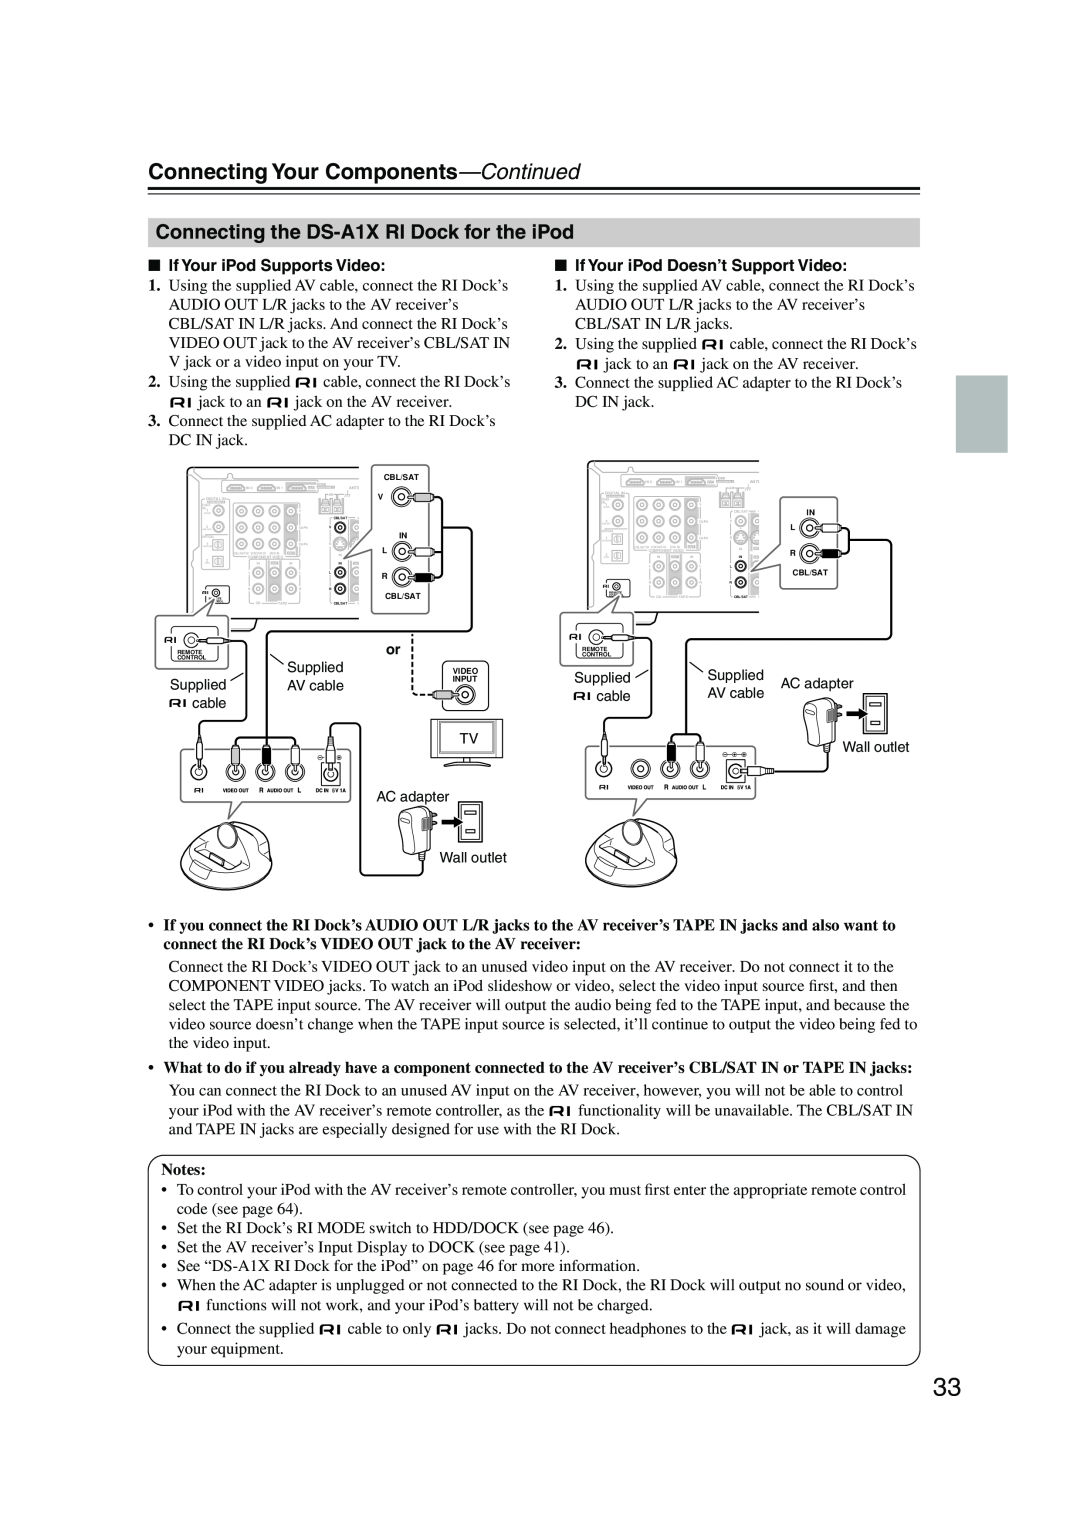 Onkyo HT-SP904 instruction manual Connecting the DS-A1XRI Dock for the iPod, Connecting Your Components—Continued, Notes 